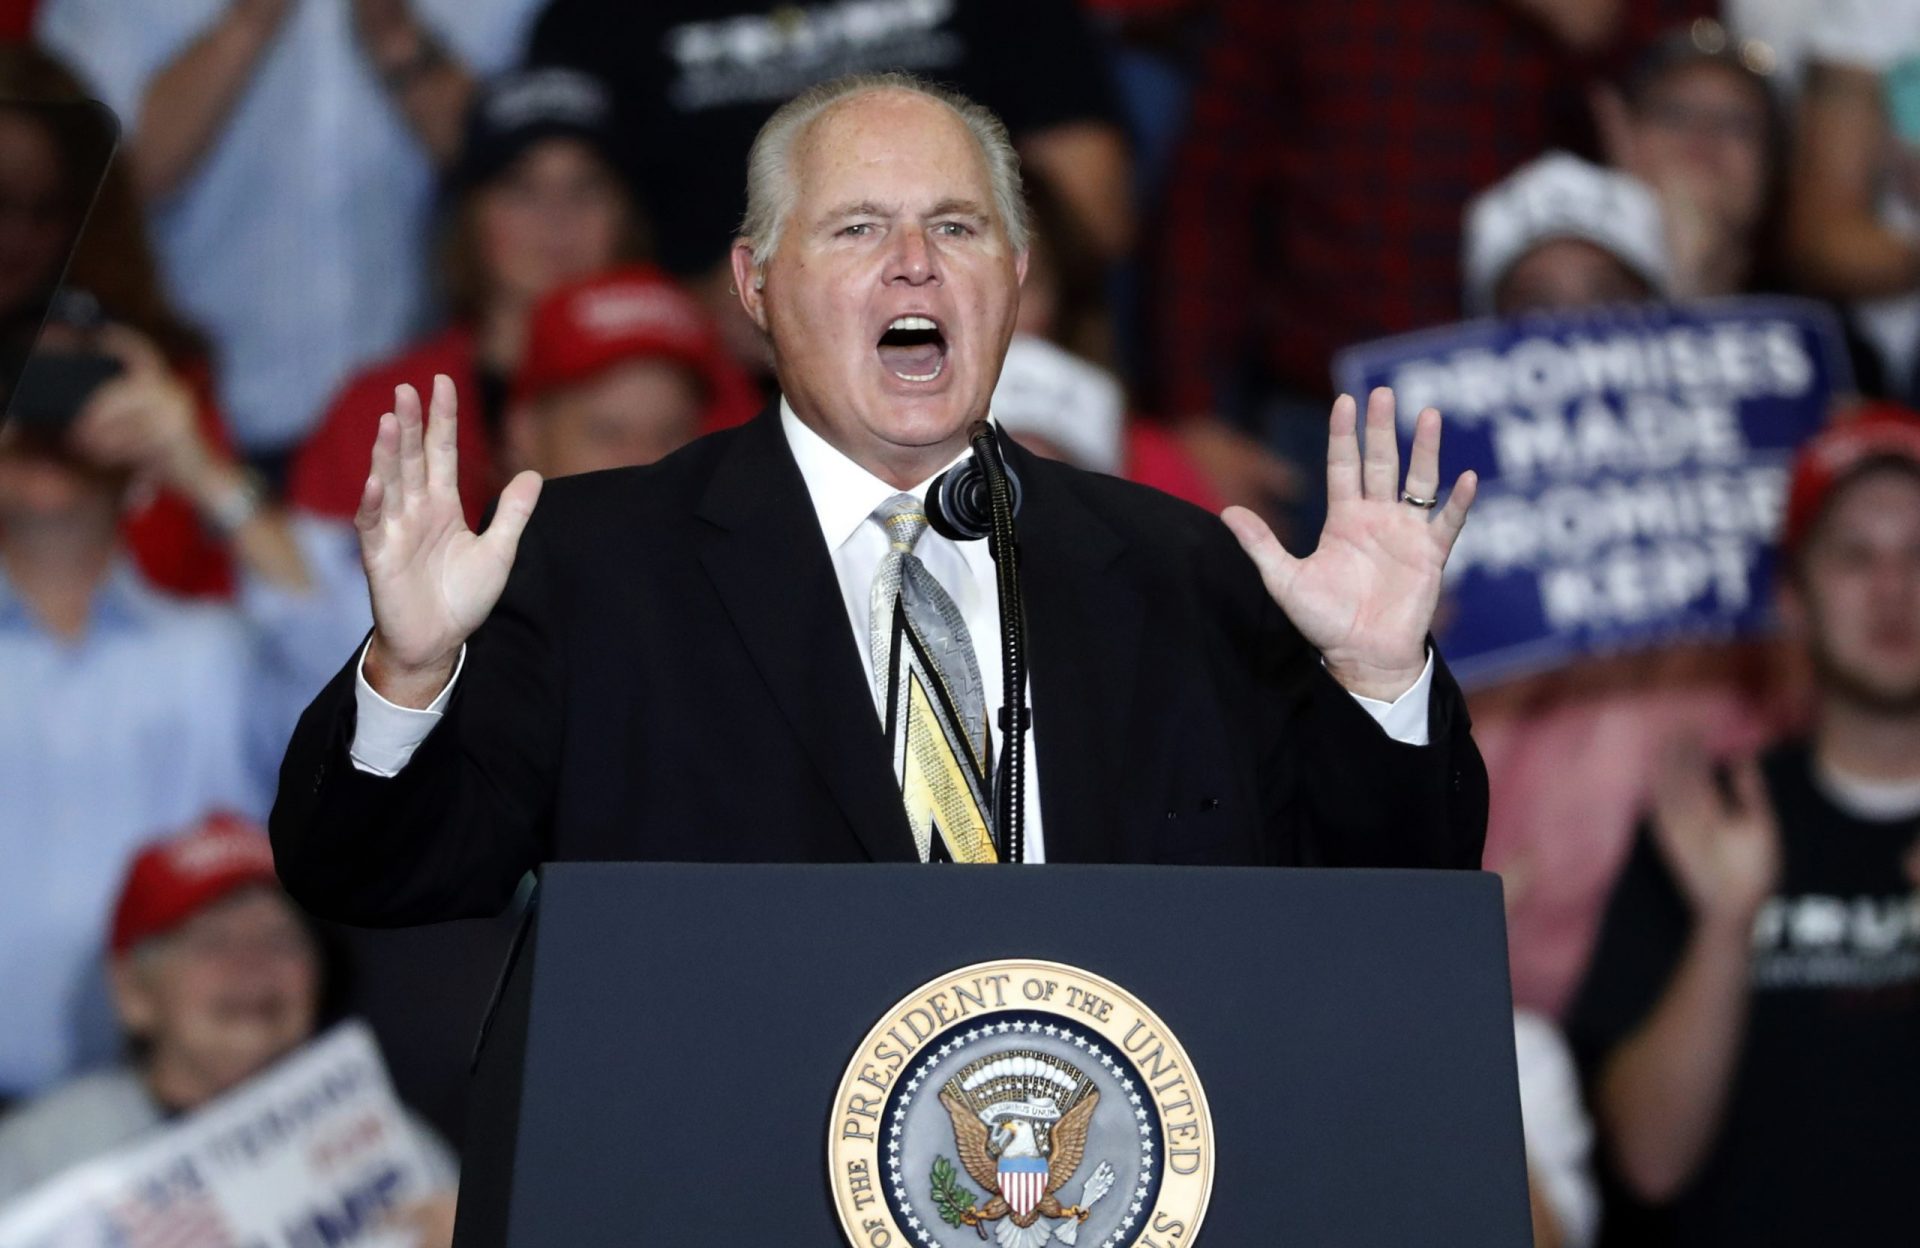 This Nov. 5, 2018 file photo shows radio personality Rush Limbaugh introducing President Donald Trump at the start of a campaign rally in Cape Girardeau, Mo.